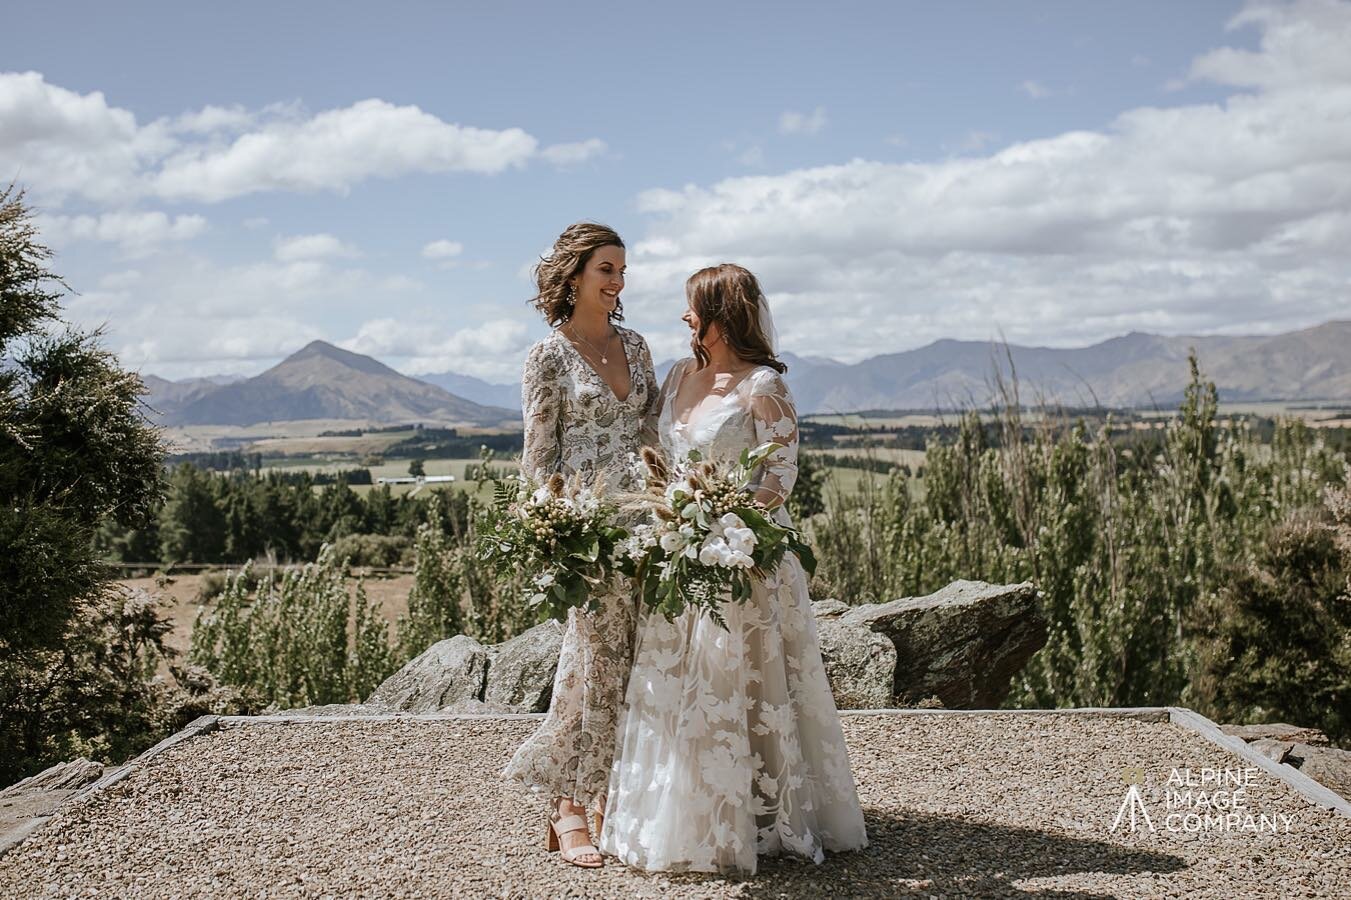 NEVER ALONE  Where would you be without your bestie beside you? Every girl has that person who they know will be beside them on their big day. &hearts;️
📸 @alpineimageco
-
-
-
#bridesmaid #bride #flowergirl #bridesquad #weddingflorist #elopement #wa